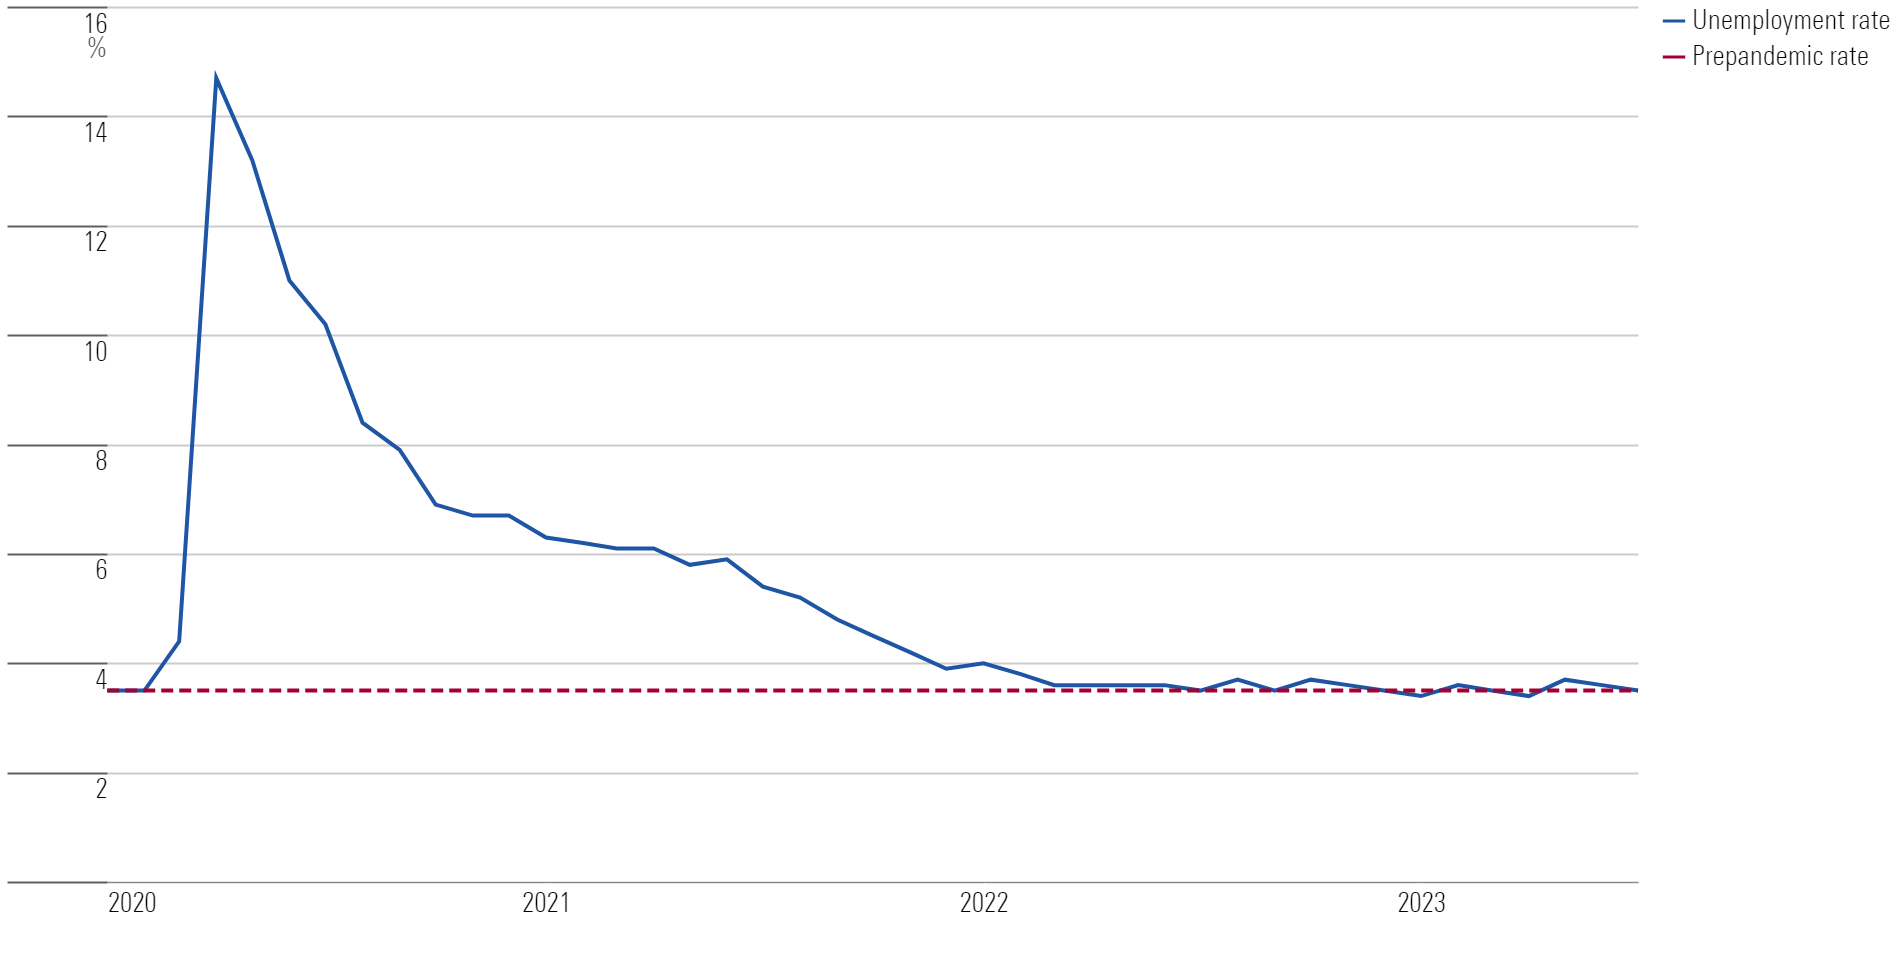 A line chart showing the unemployment rate versus the unemployment rate before the COVID-19 pandemic from January 2020 to July 2023.